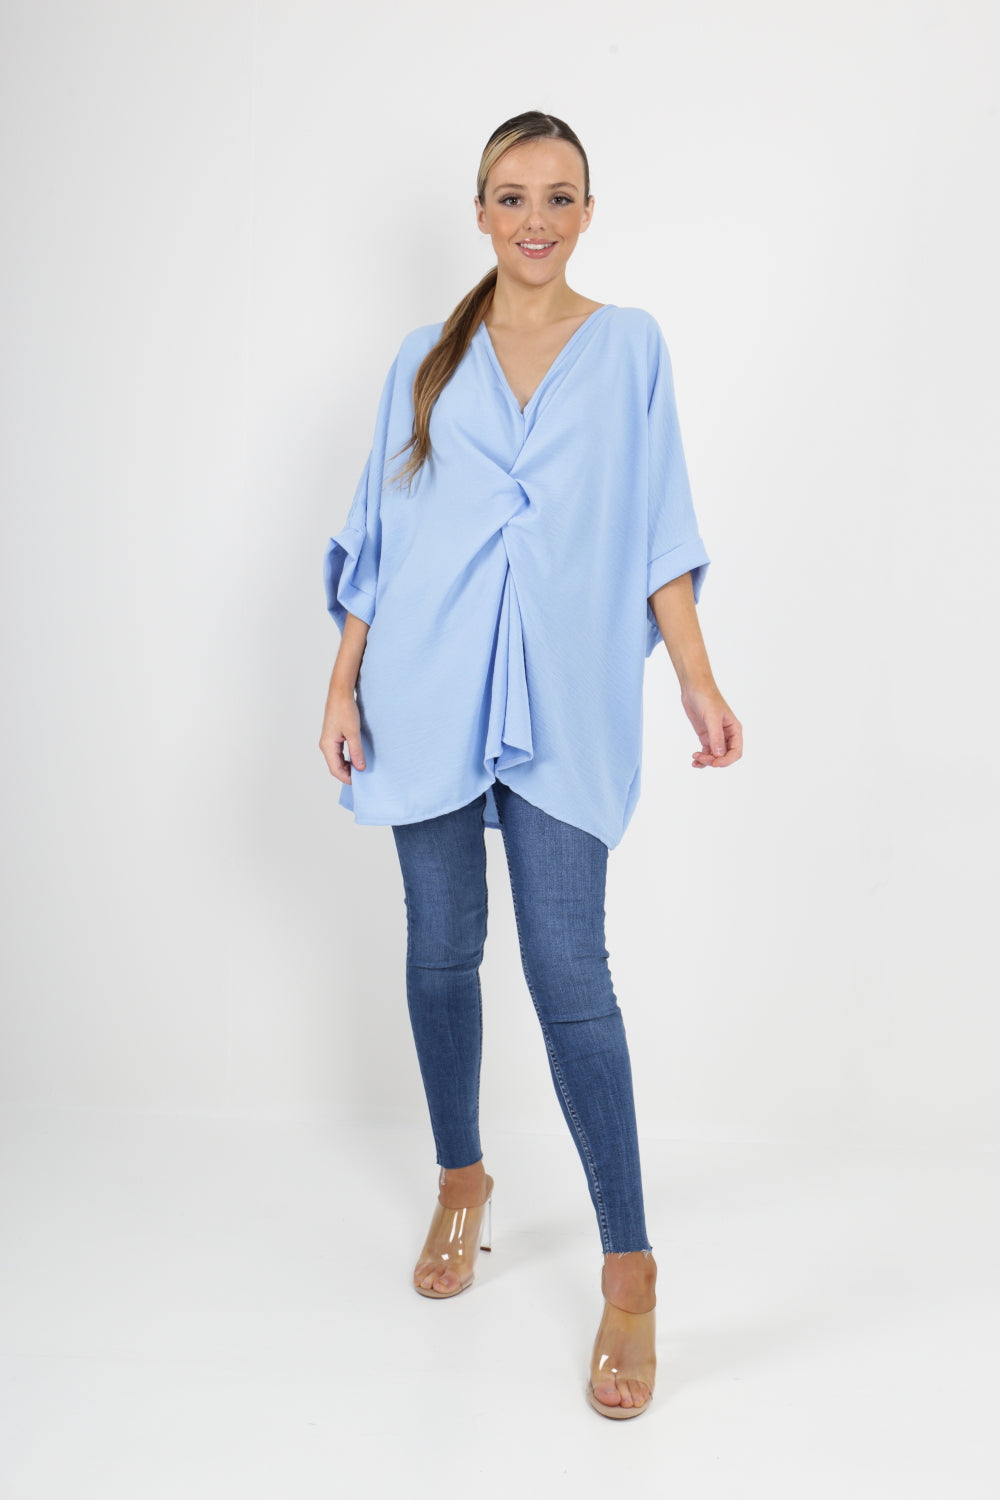 Italian Twisted Front Batwing Oversized Top